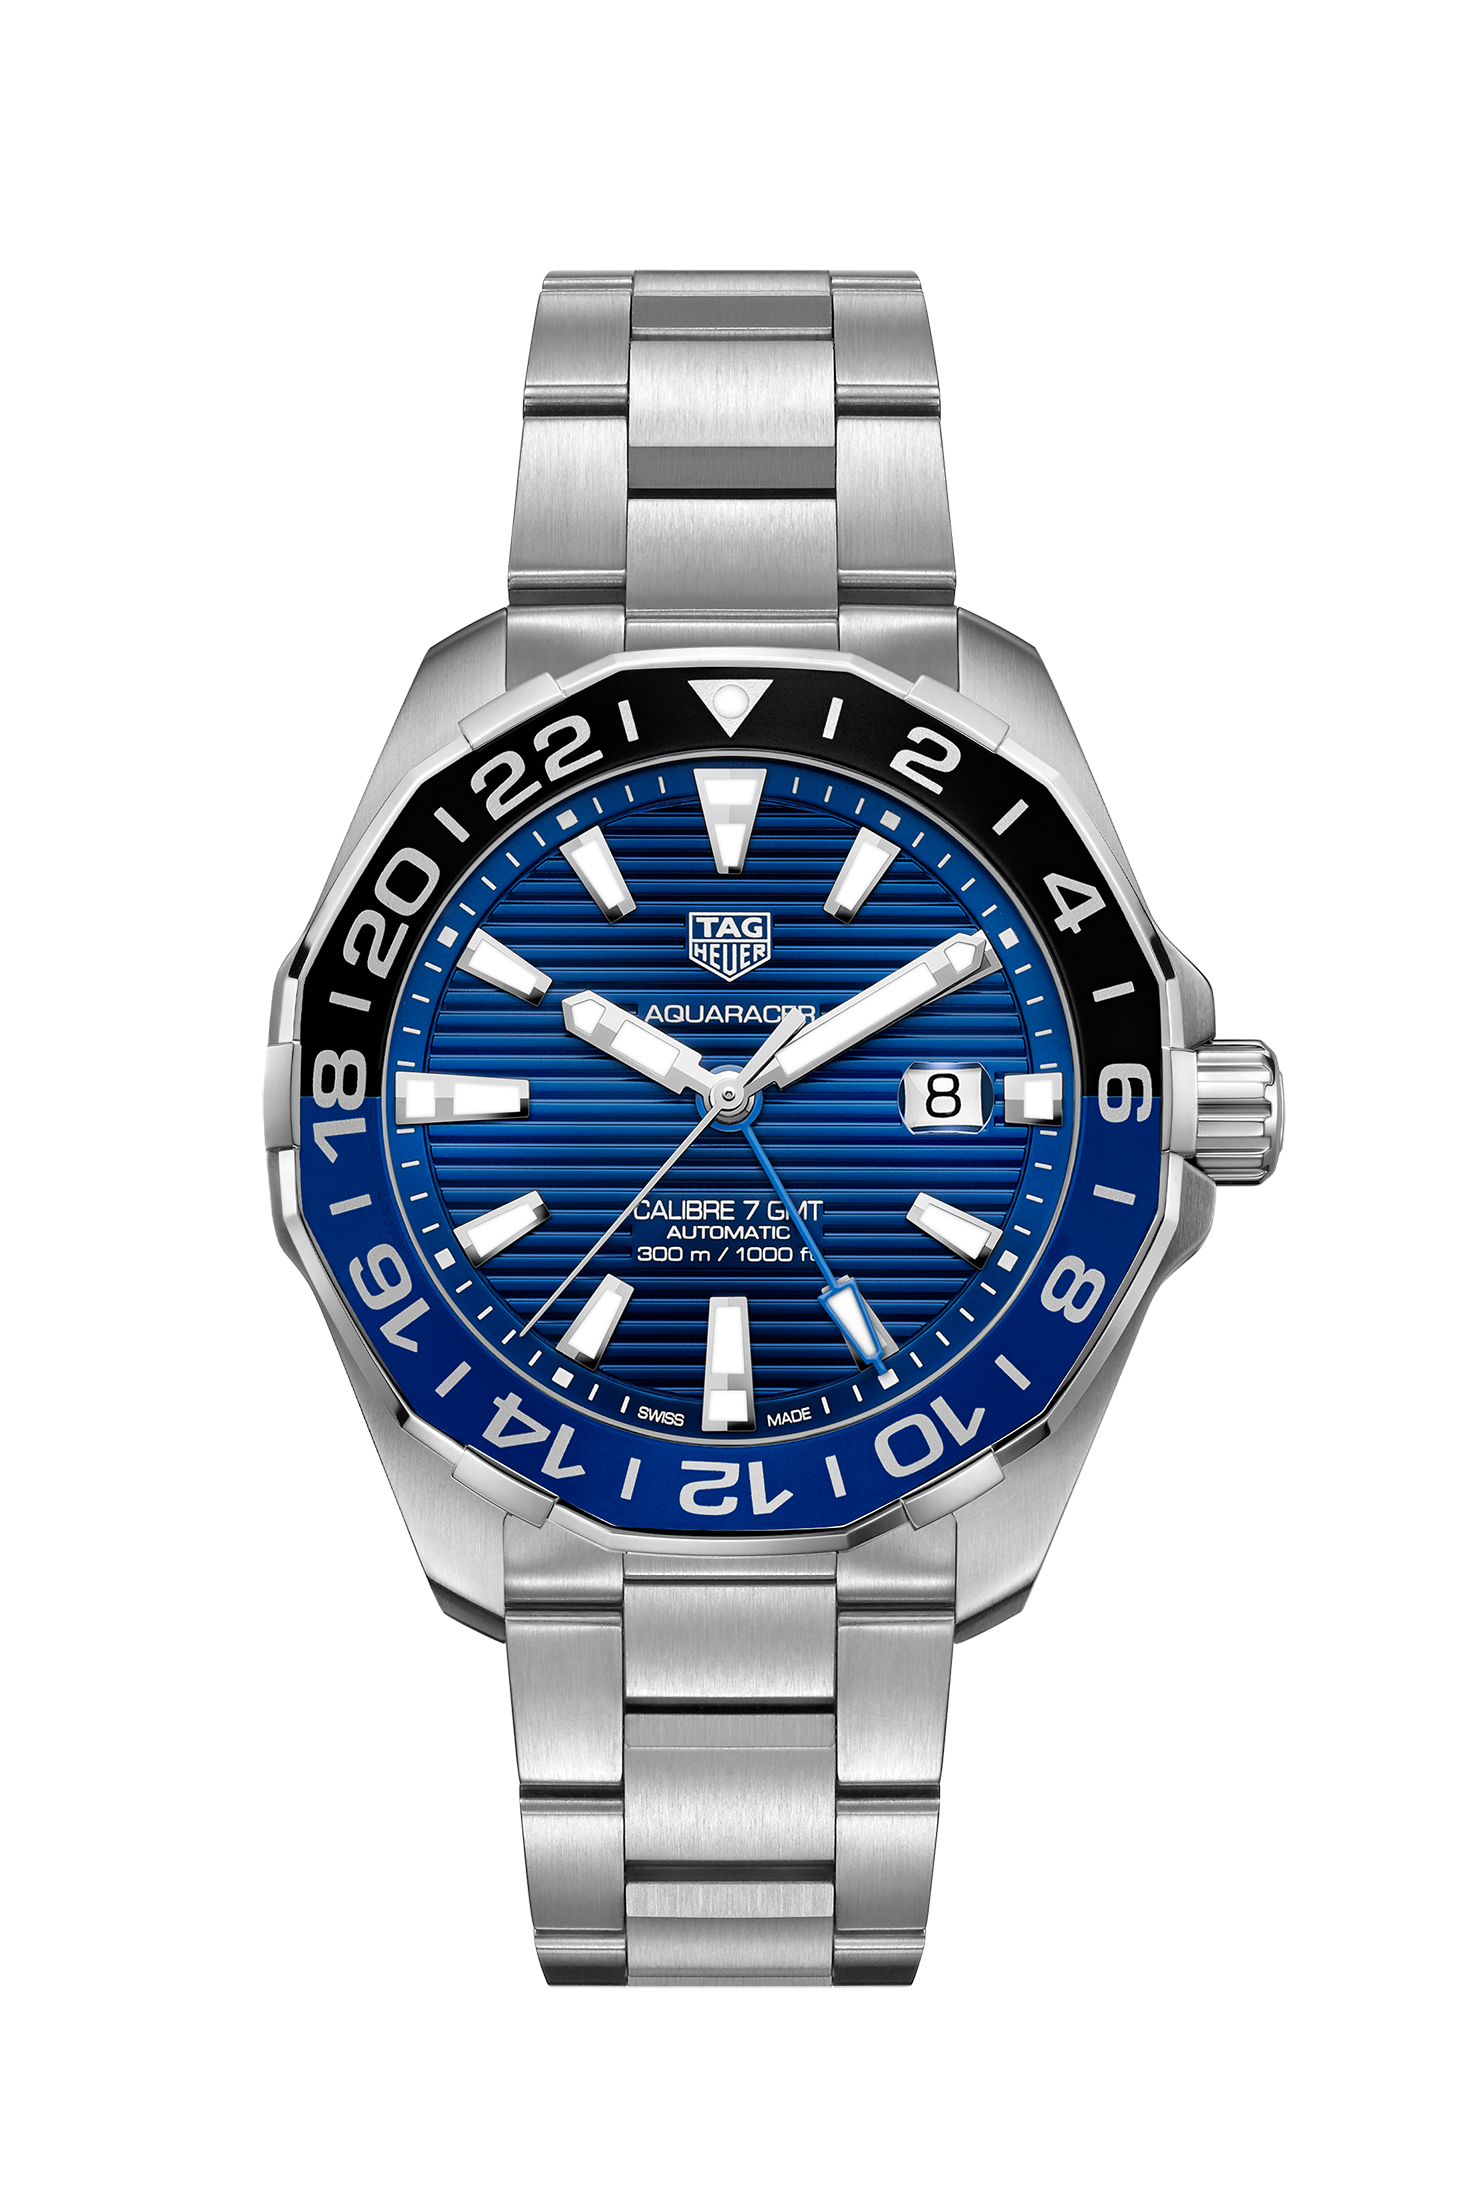 The New TAG Heuer Aquaracer GMT 